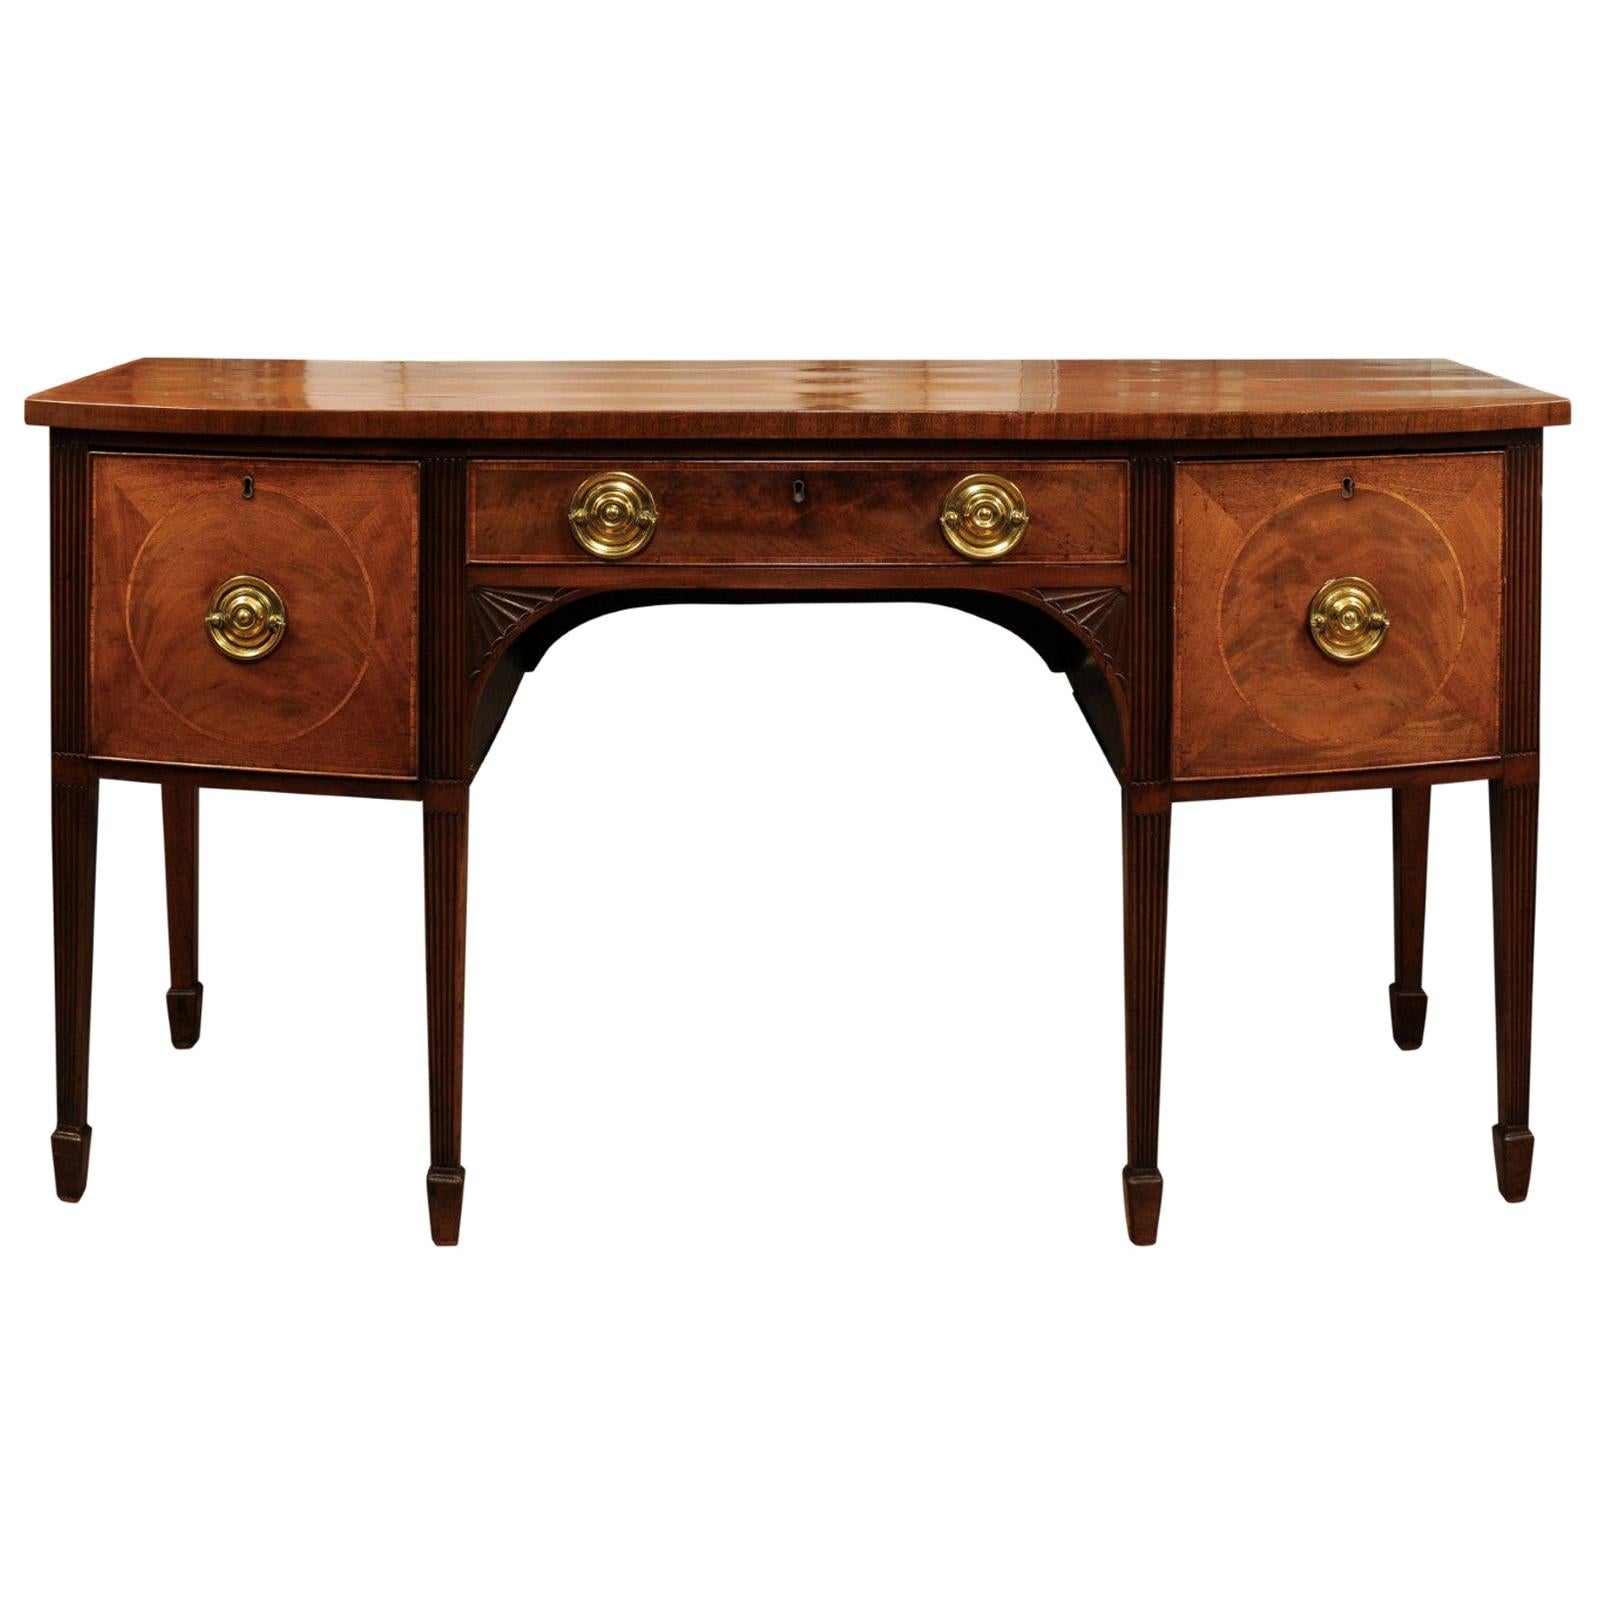 English George III Mahogany Bow-Front Inlaid Sideboard, Early 19th Century